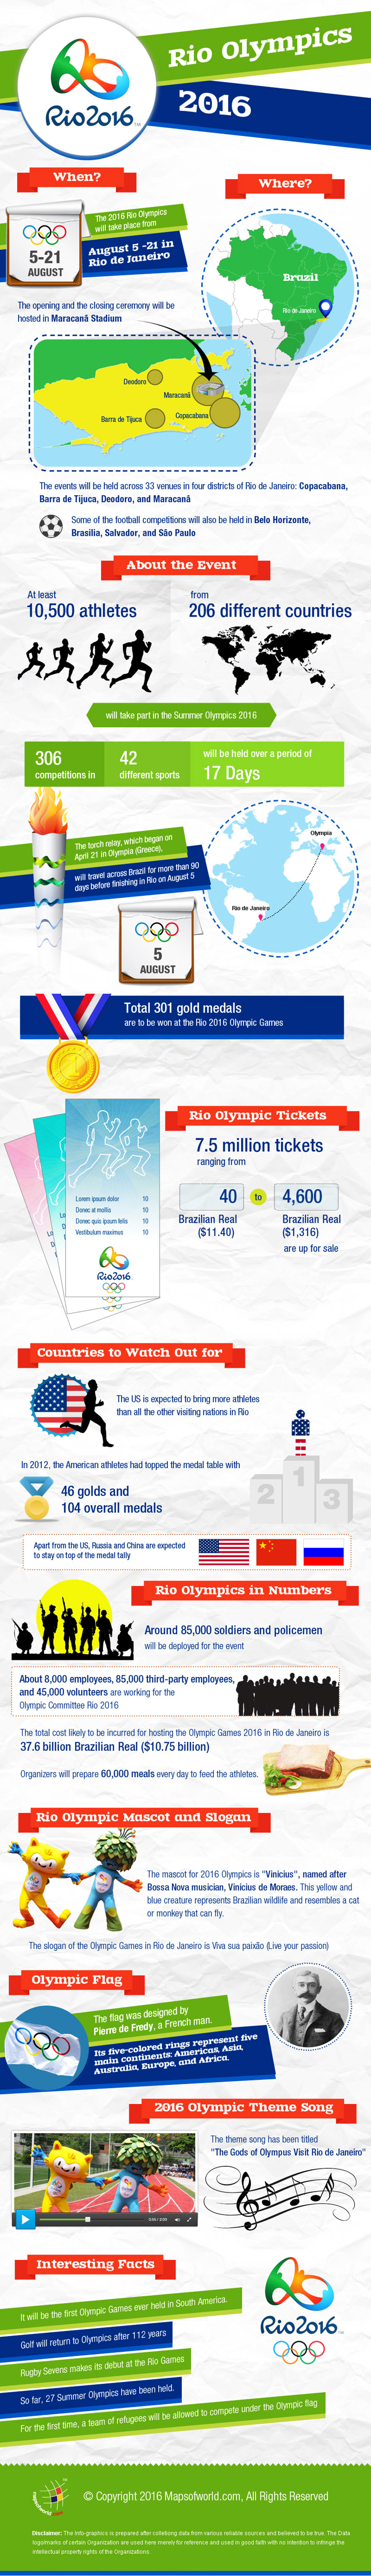 Rio 2016 Summer Olympics in Numbers - Sports Infographic